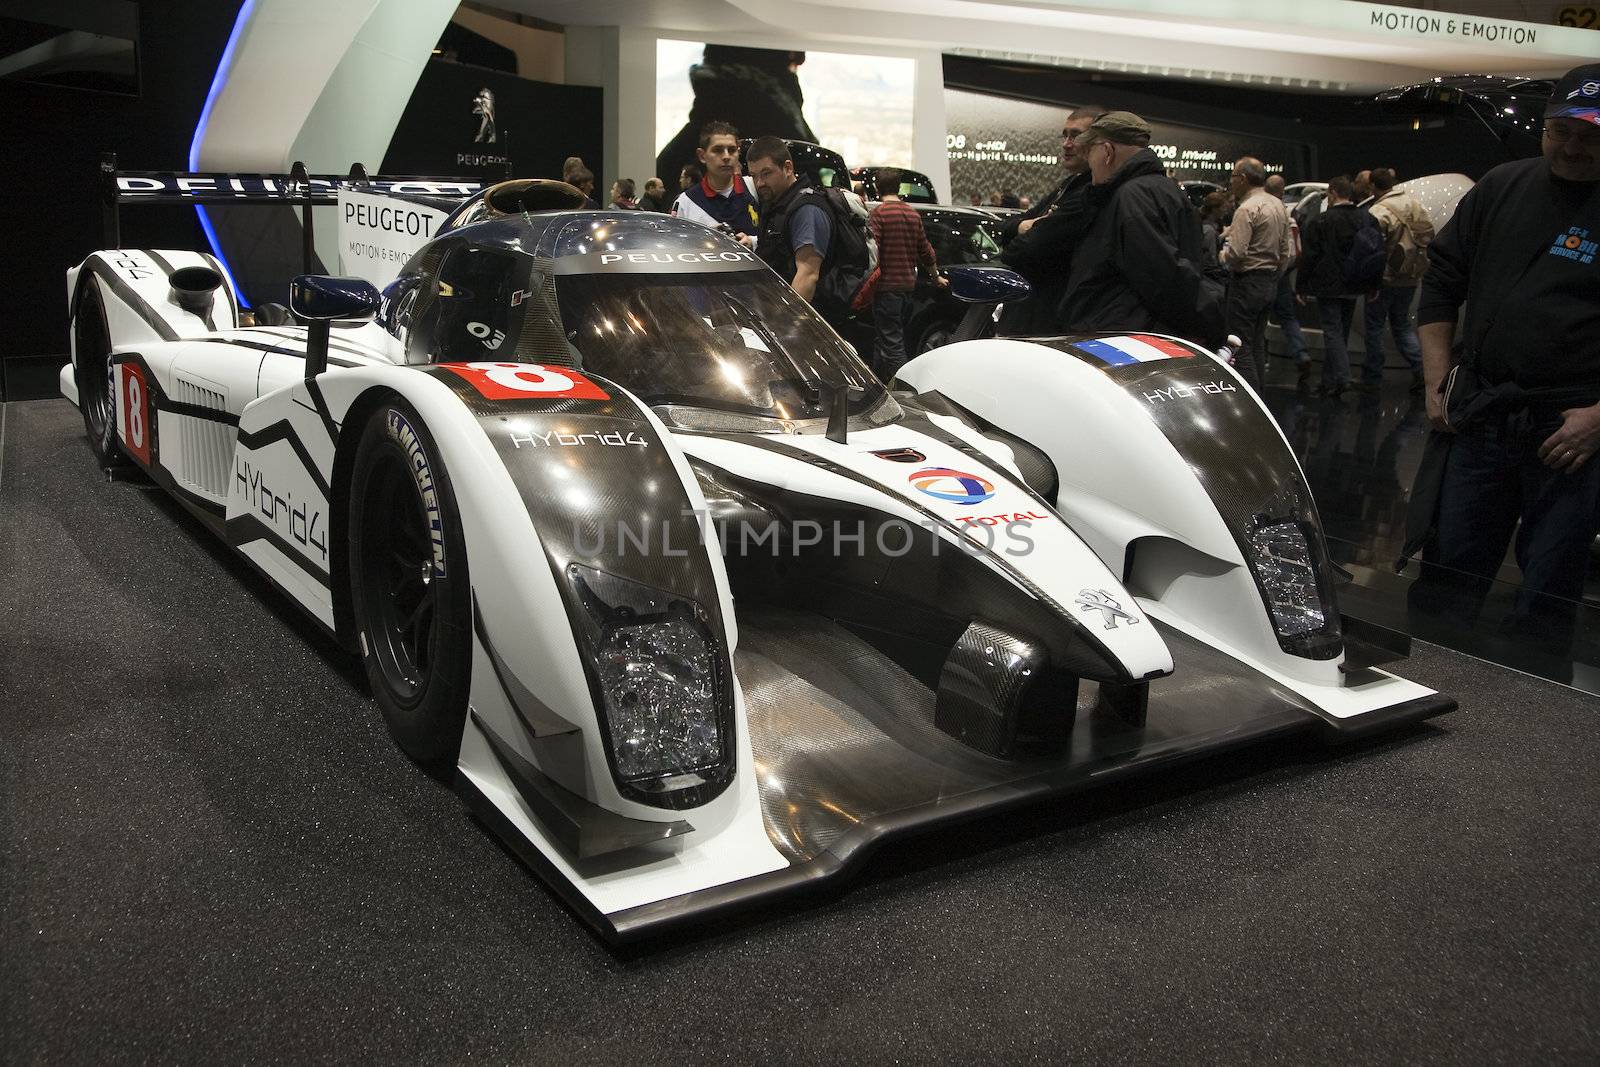 Peugeot 908 Hybrid4 by shadow69